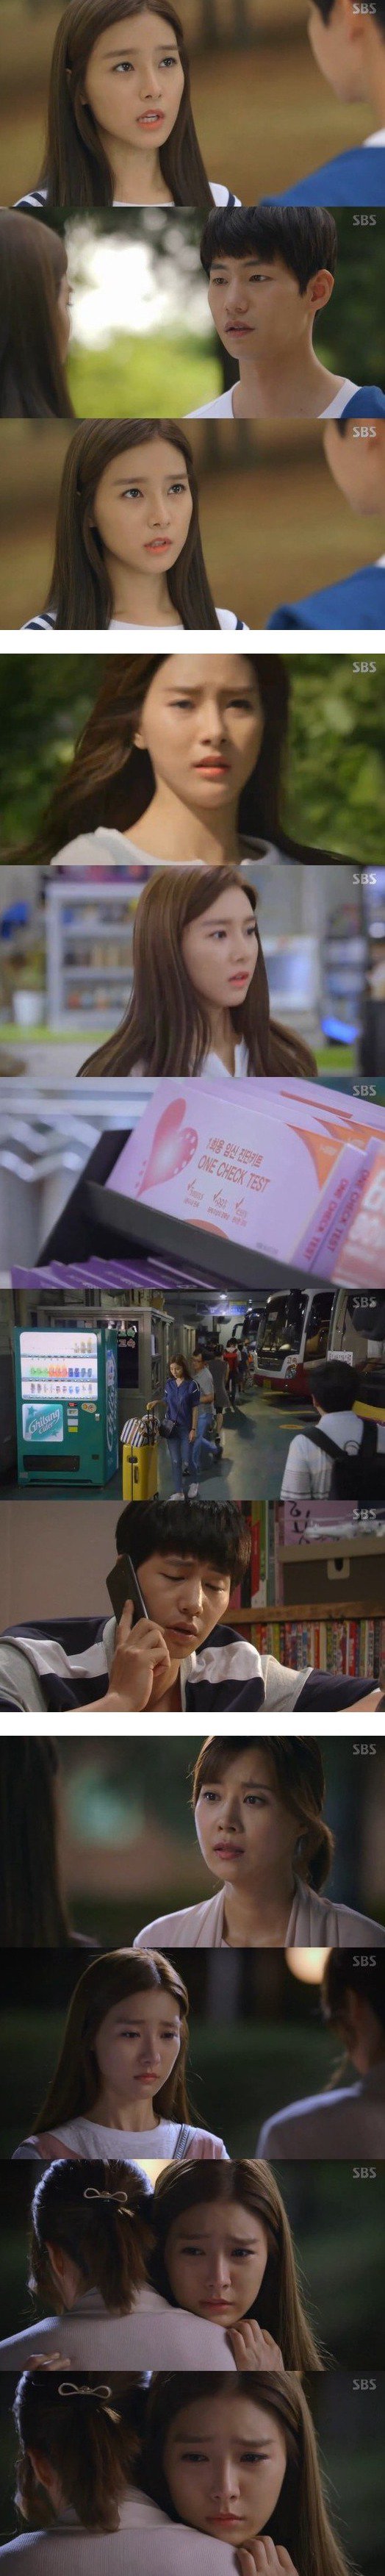 episodes 1 and 2 captures for the Korean drama 'My Gap-soon'